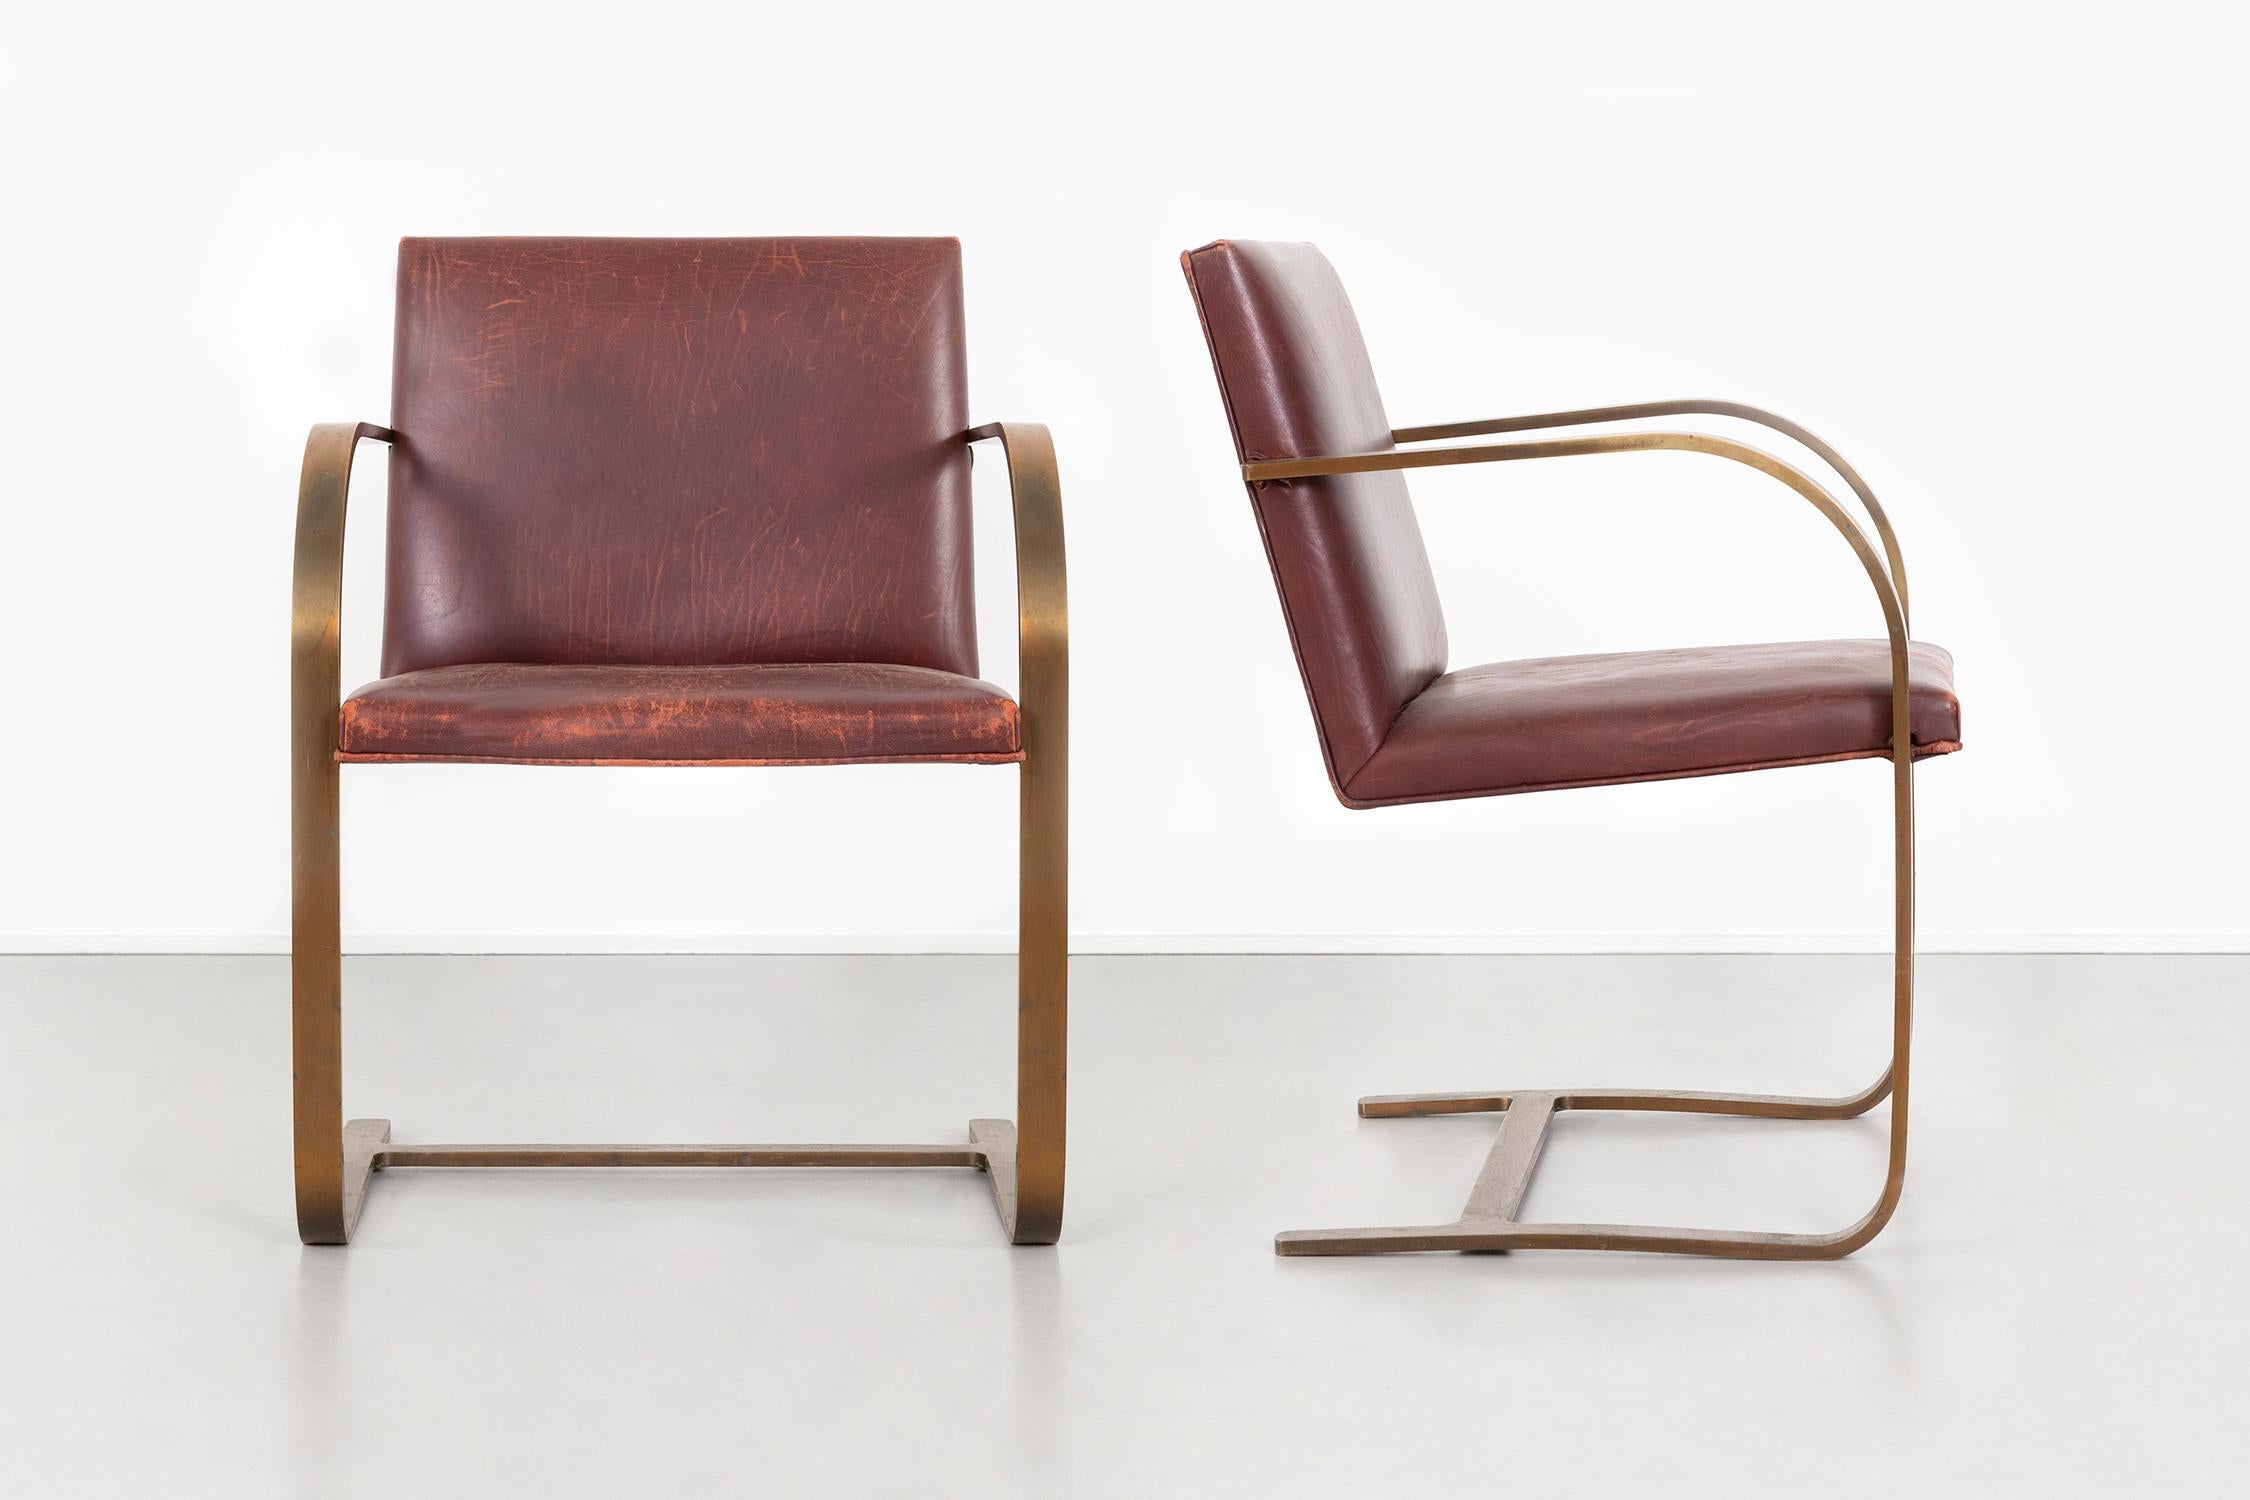 set of two bronze flat bar Brno chairs

designed by Ludwig Mies van der Rohe for Brueton

USA, d 1930 / c 1970

leather + brass

measures: 30 ½” H x 23“ W x 22“ D x seat 17“ H

sold as a set or individually.

manufacturer’s label located under